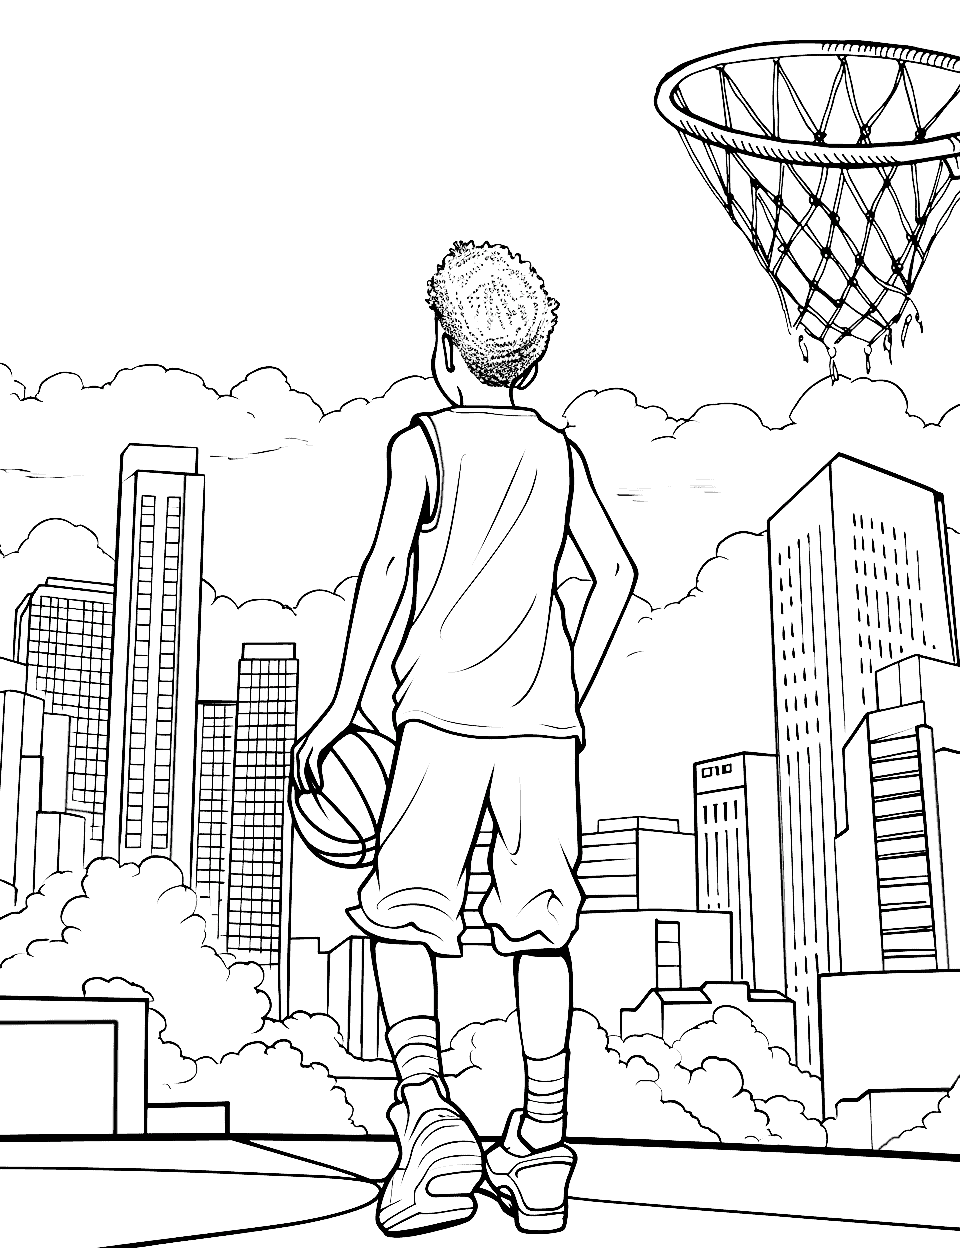 City High Hoops Basketball Coloring Page - A scene of a city court with buildings in the background.